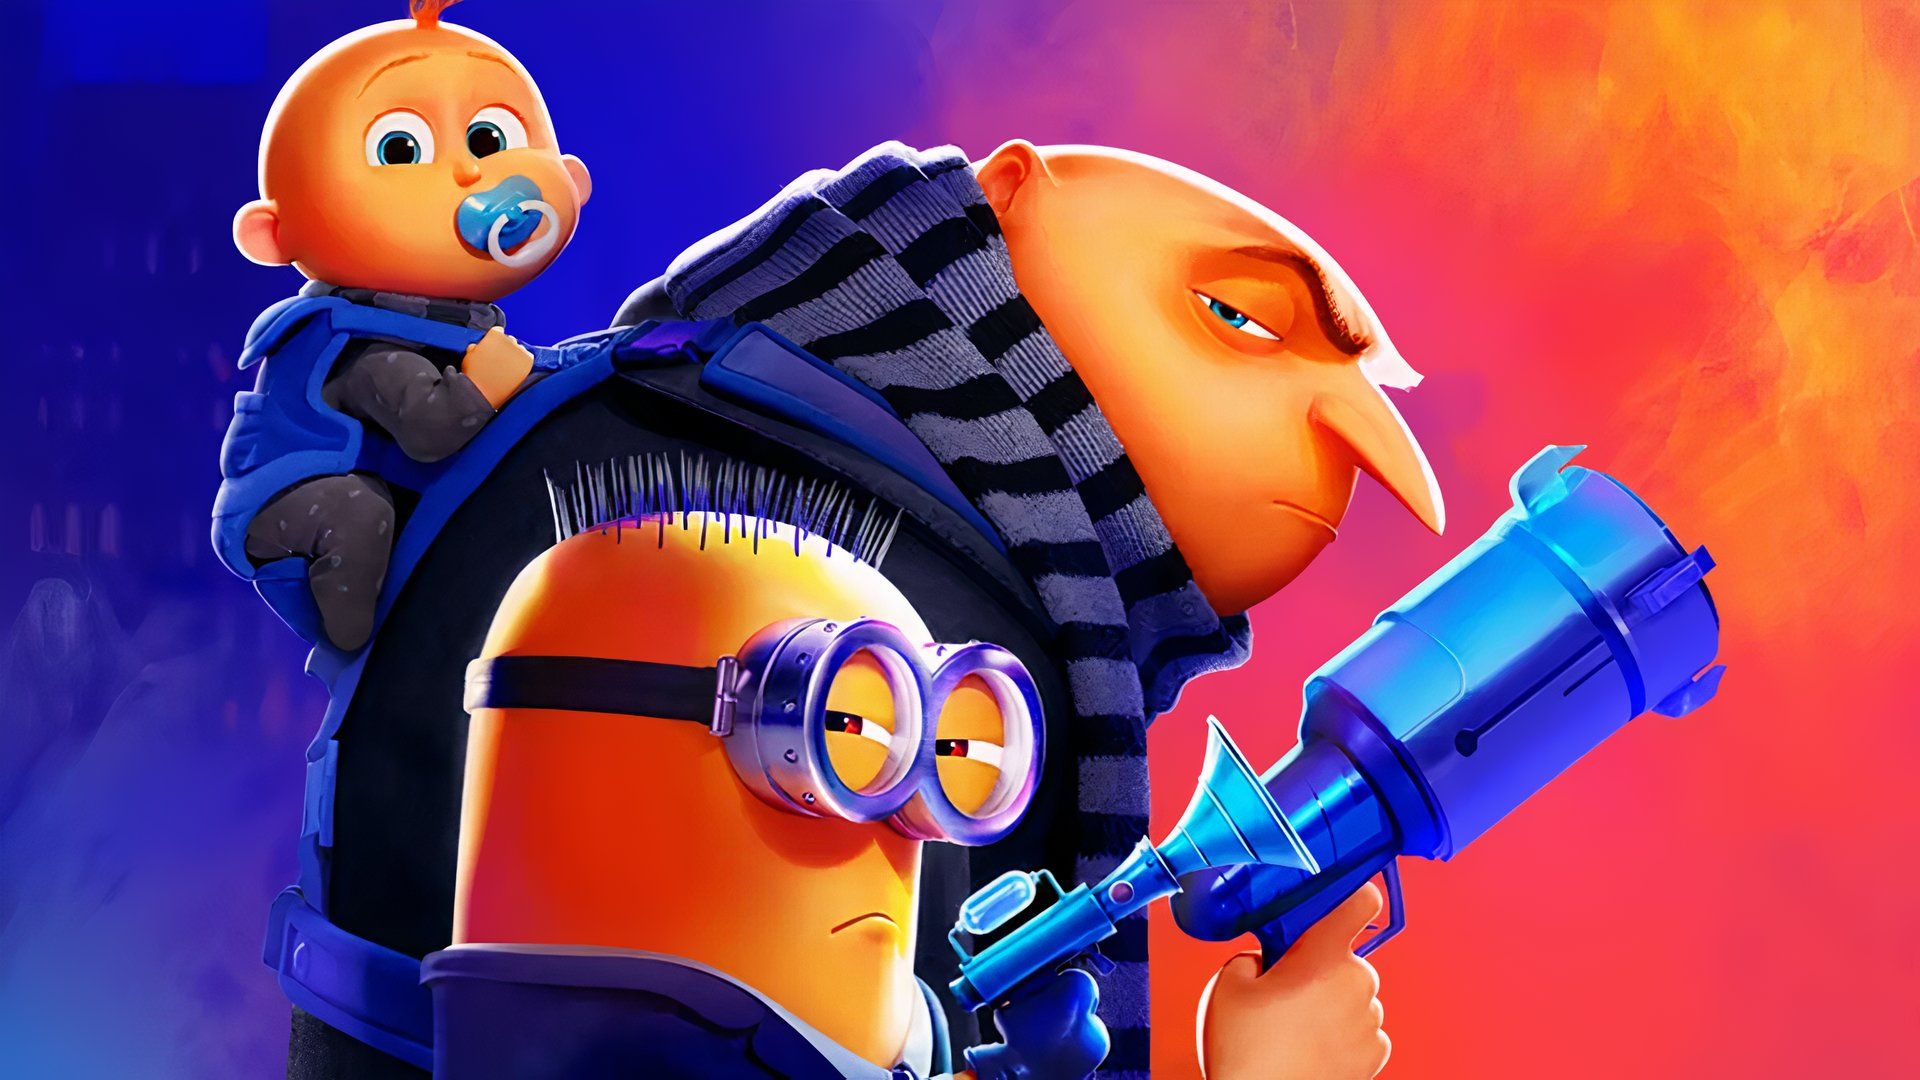 Cropped Despicable Me 4 poster with Gru Minion and Baby